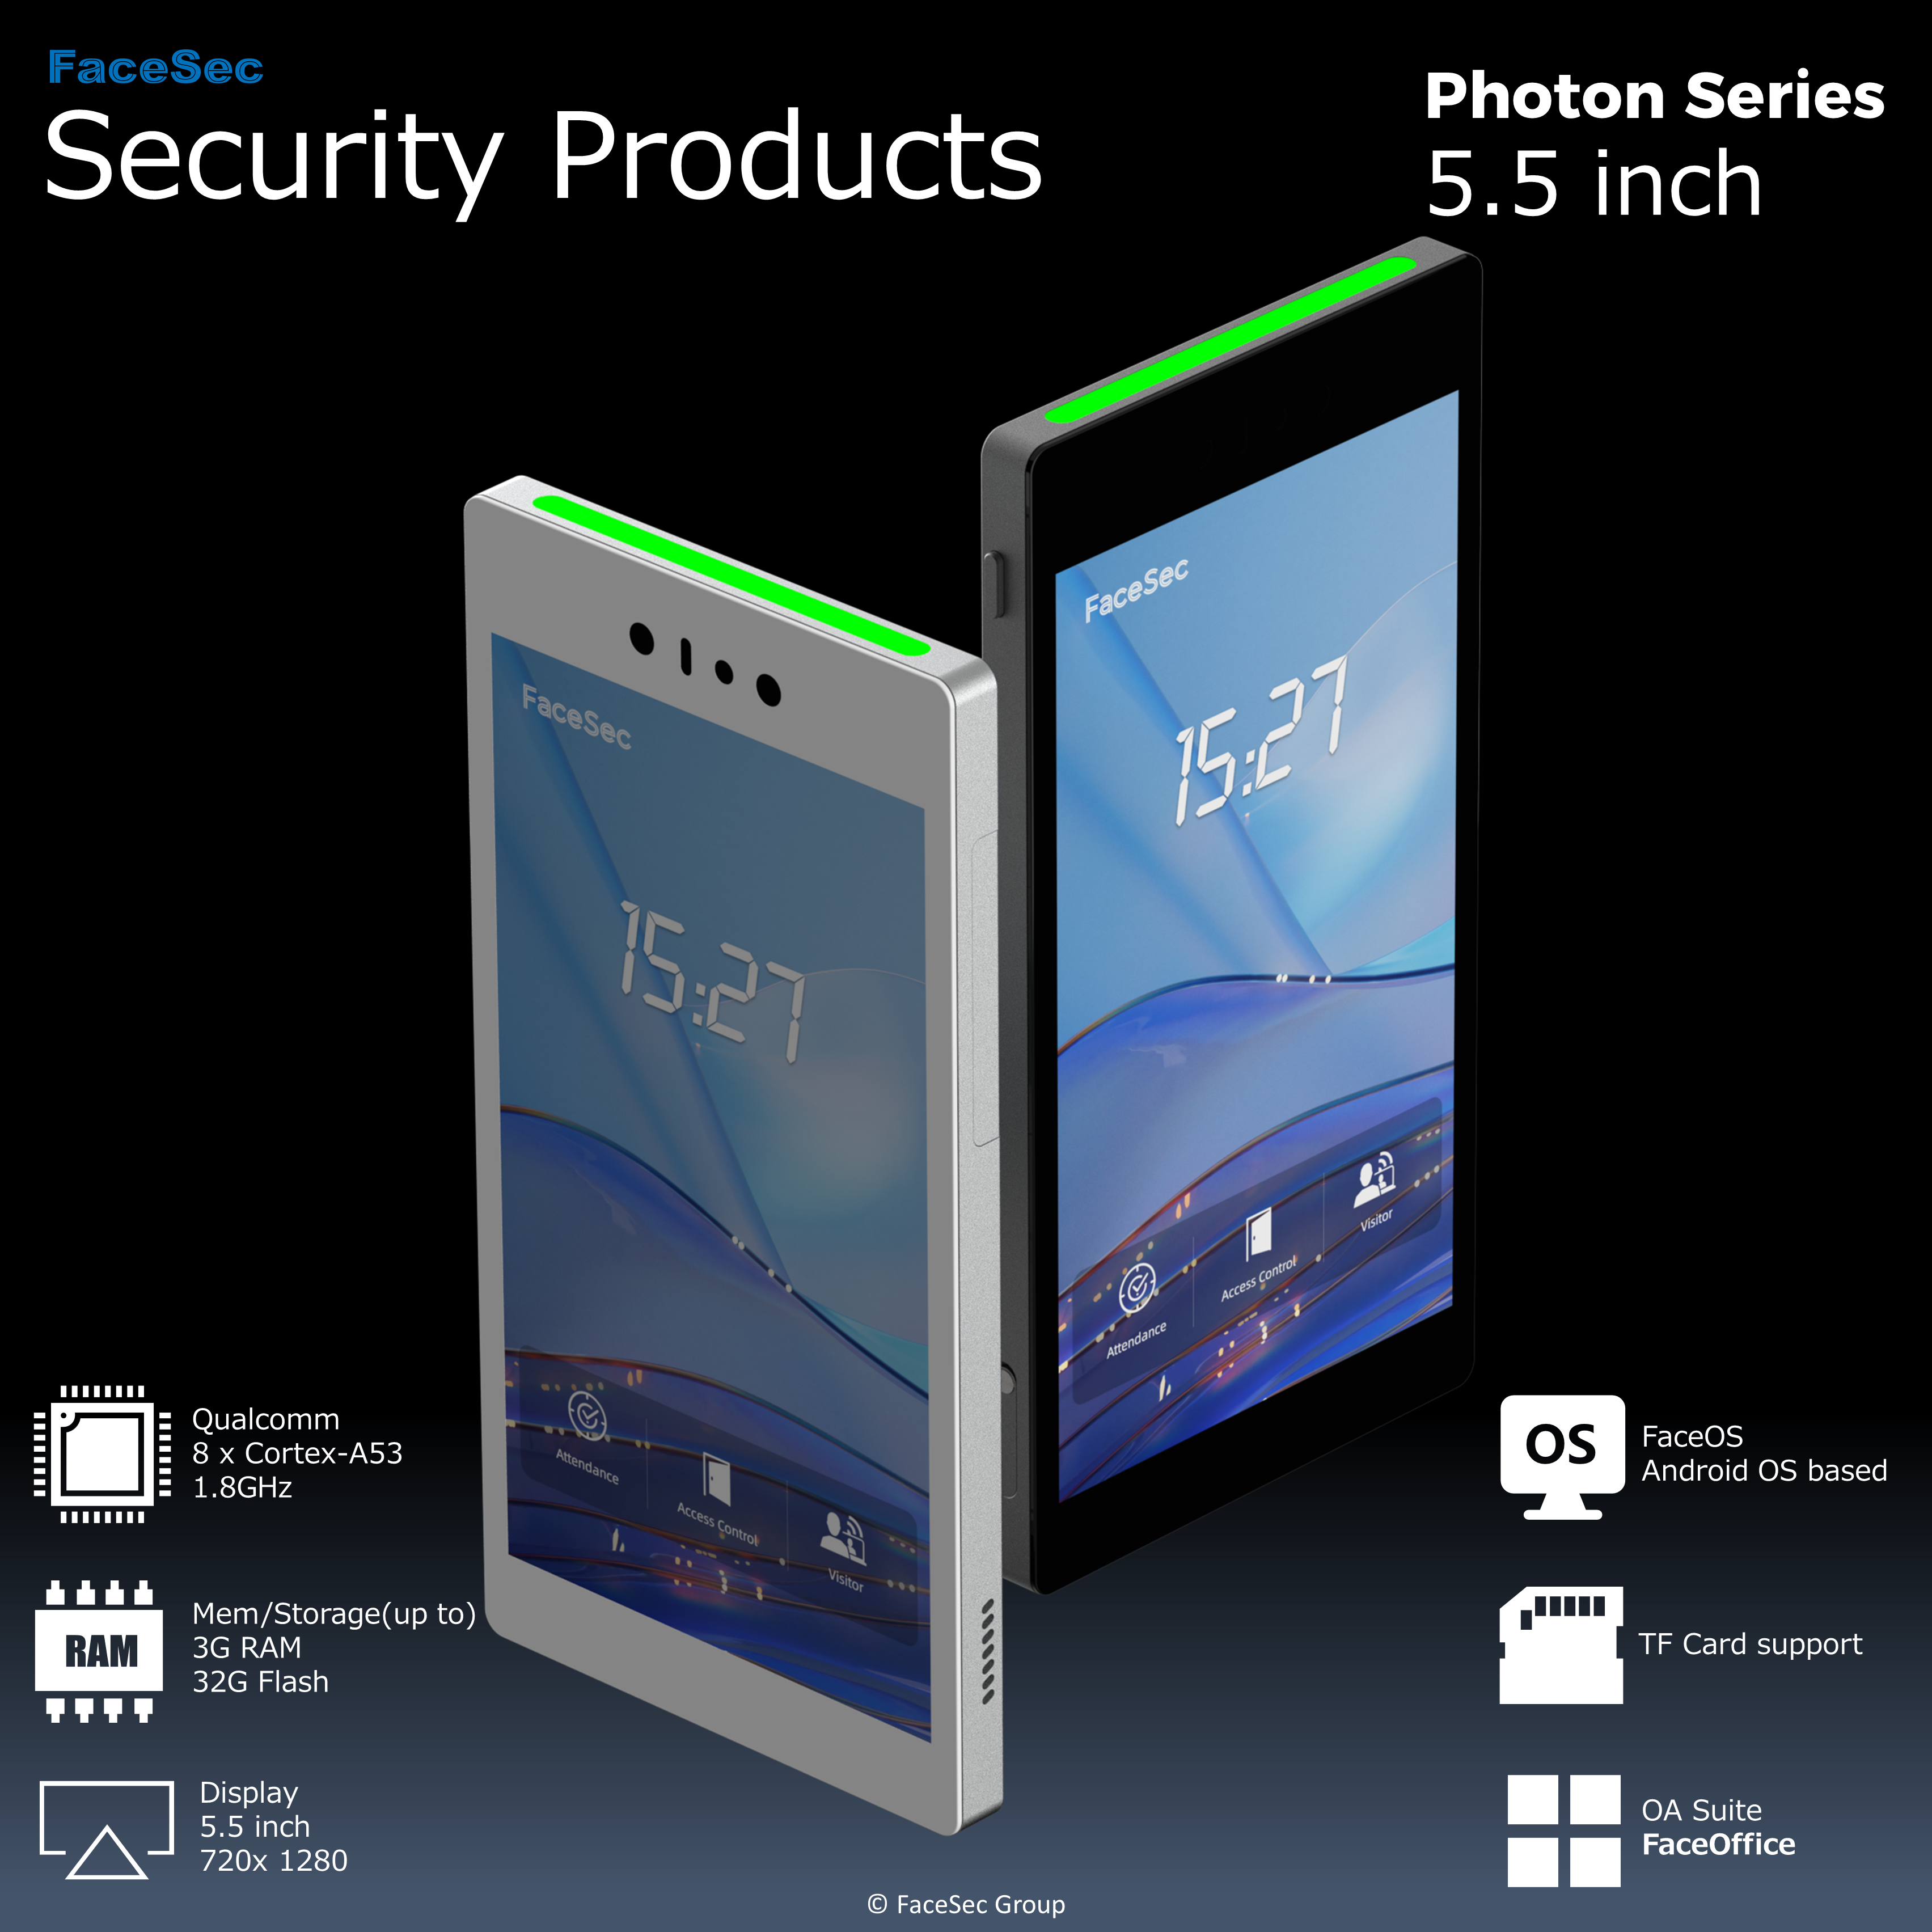 Photon Series 5.5inch(Security Products)